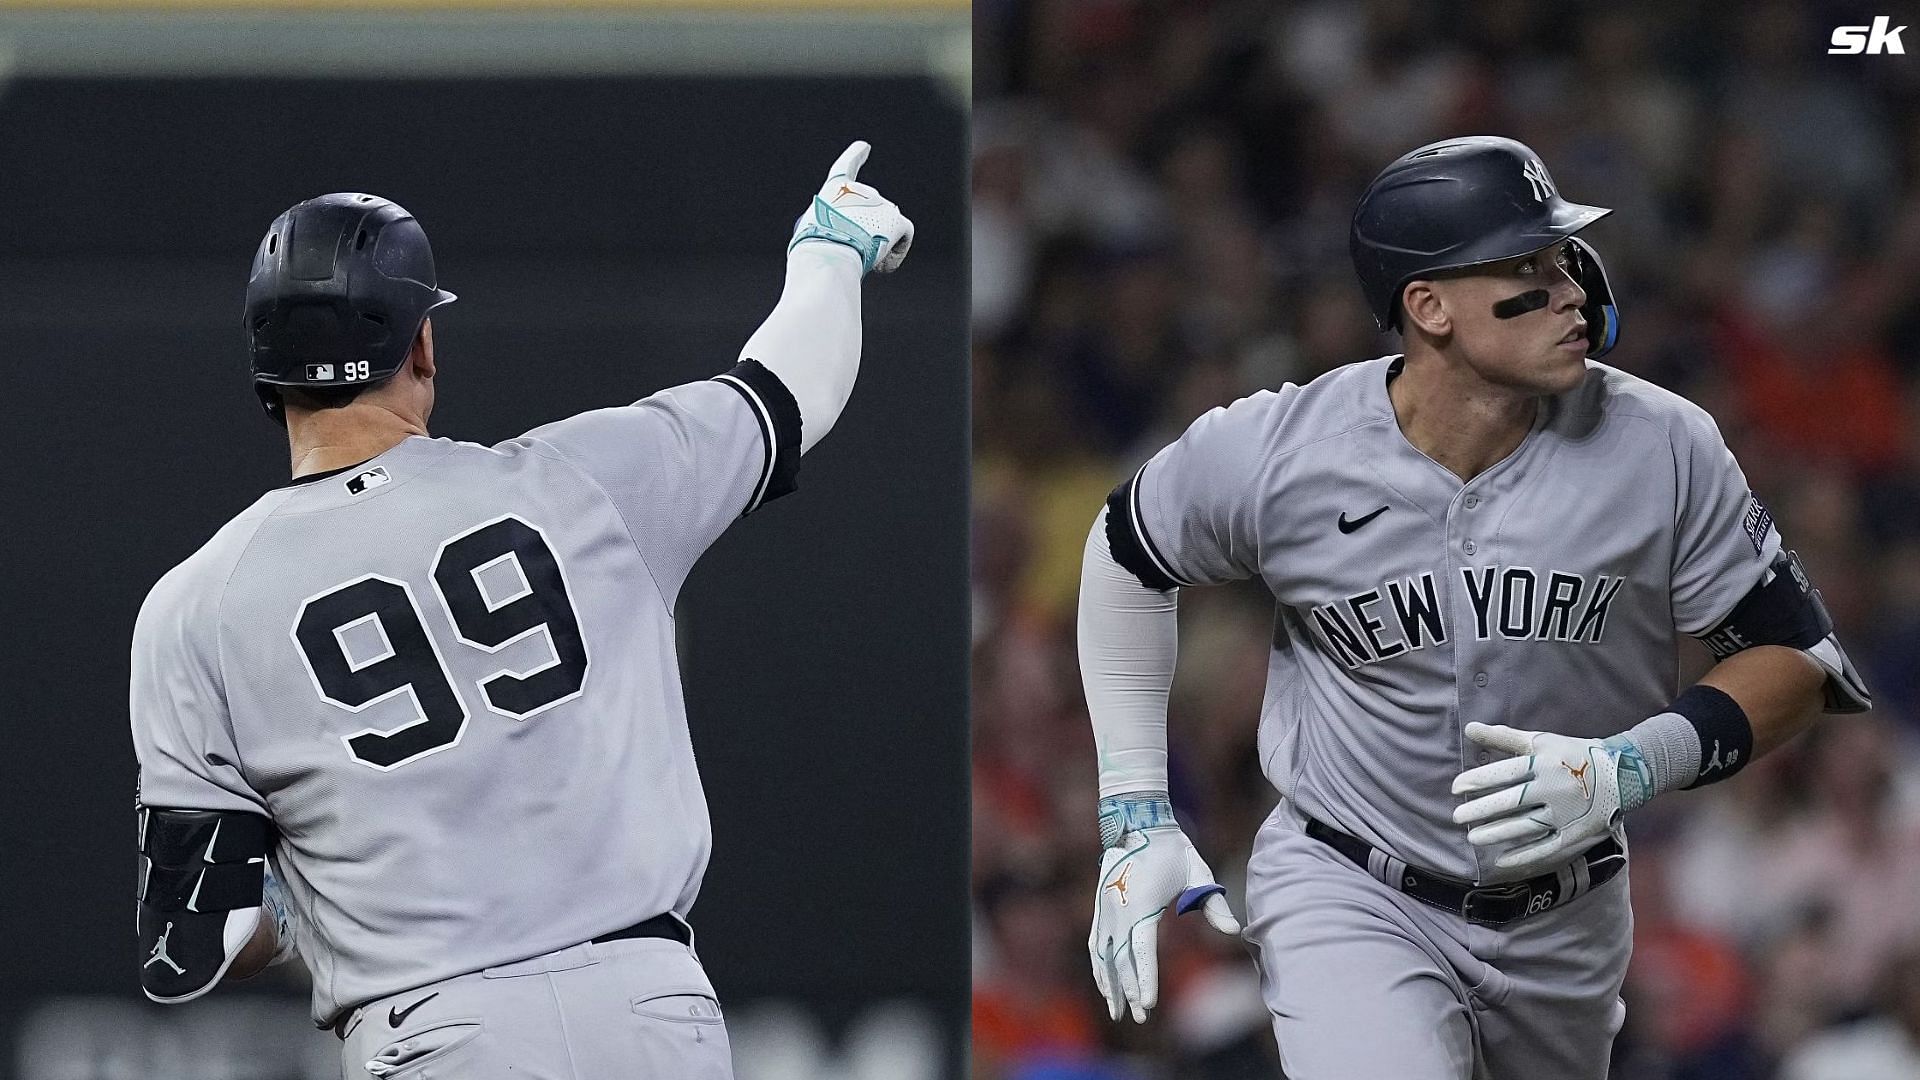 Yankees superstar Aaron Judge fastest to 250 home runs to leave